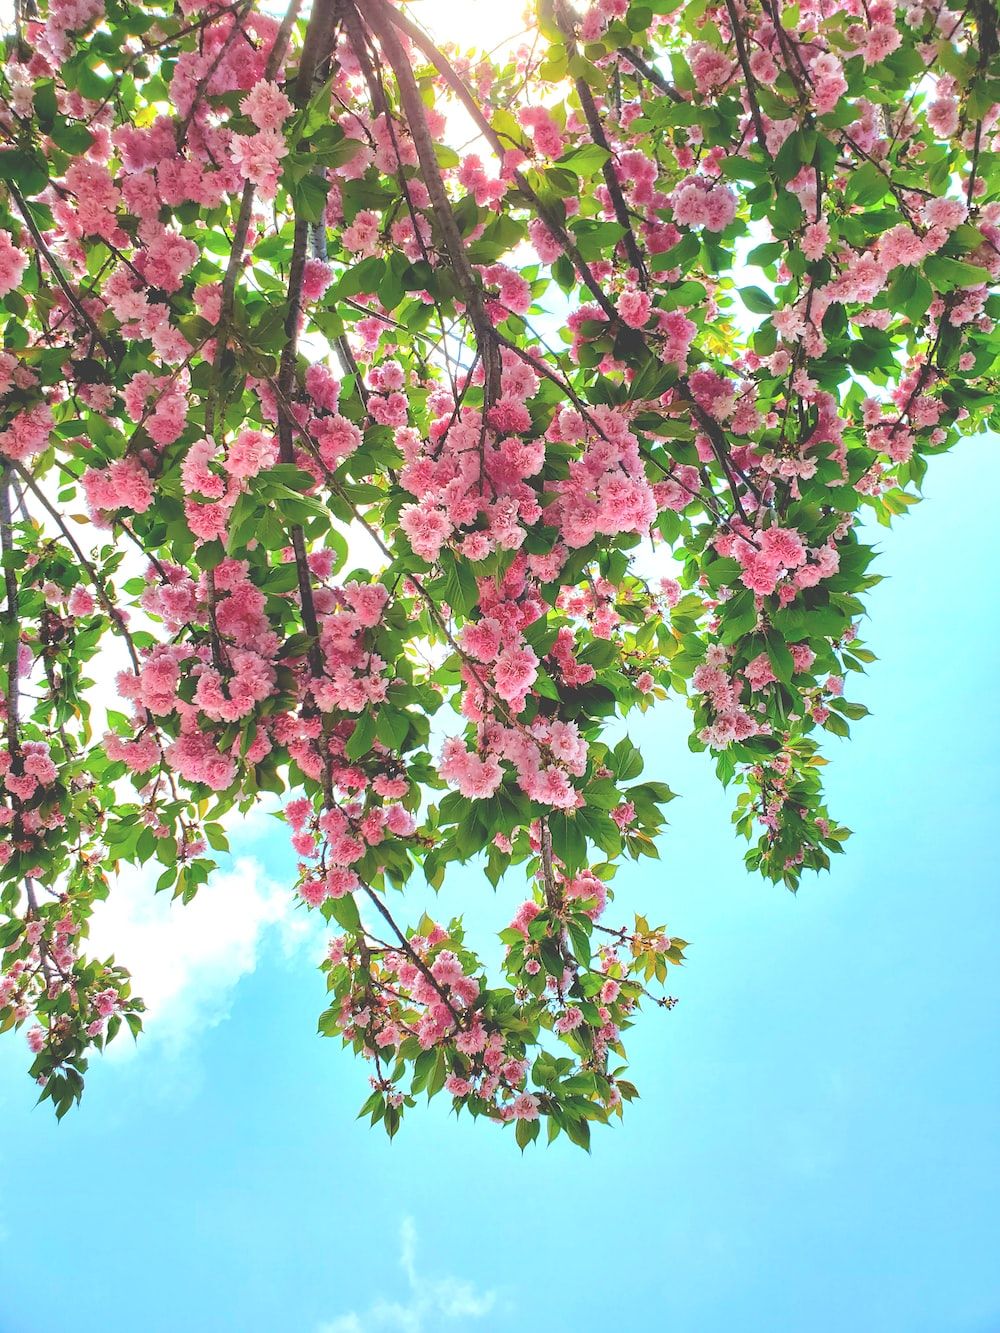 Spring Aesthetic Picture. Download Free Image